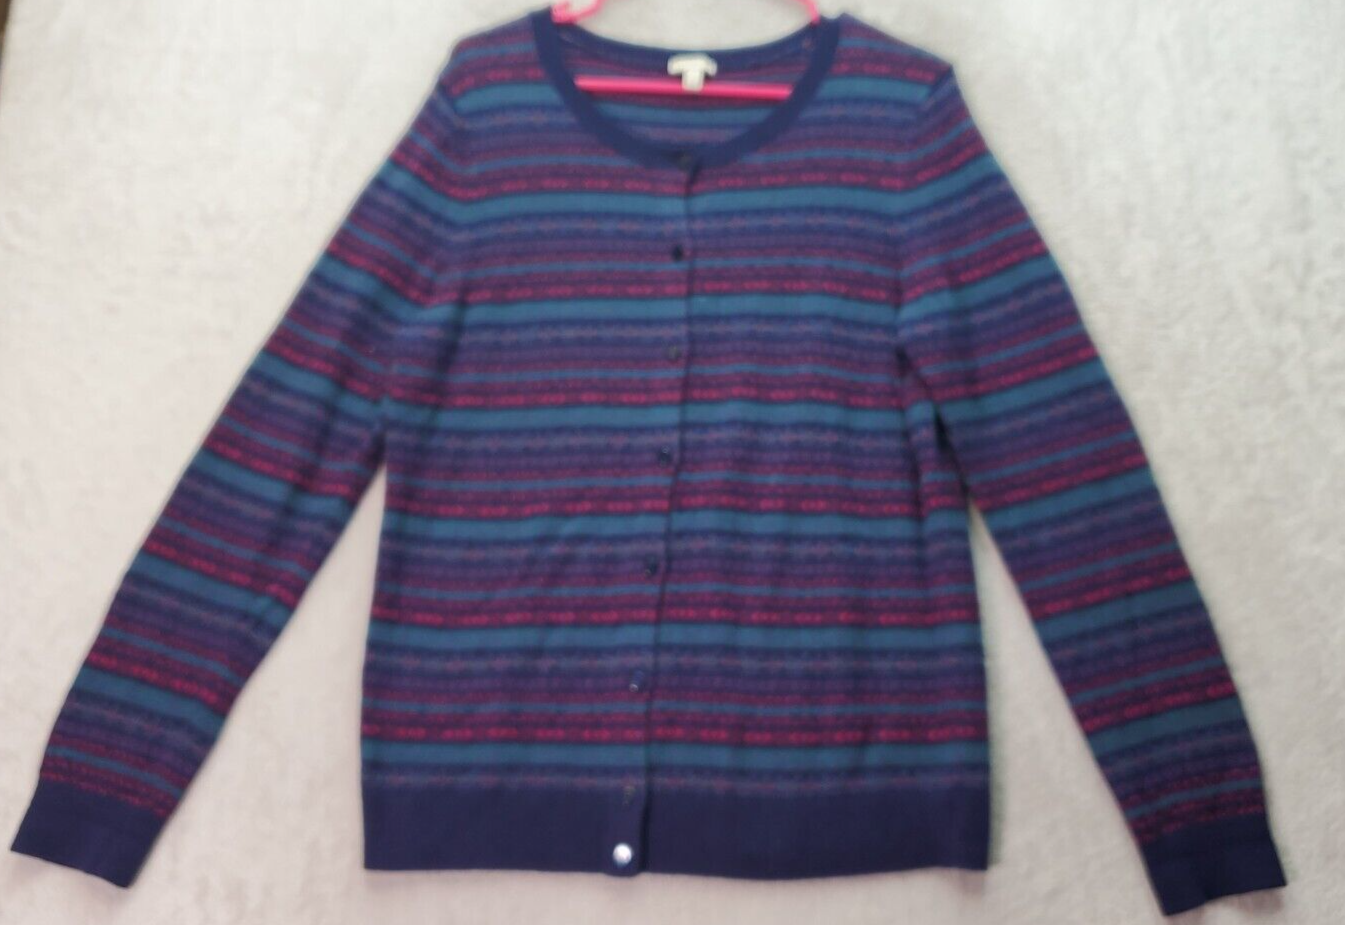 Primary image for Talbots Cardigan Sweater Womens M Multi Fair Isle Nylon Long Sleeve Button Front